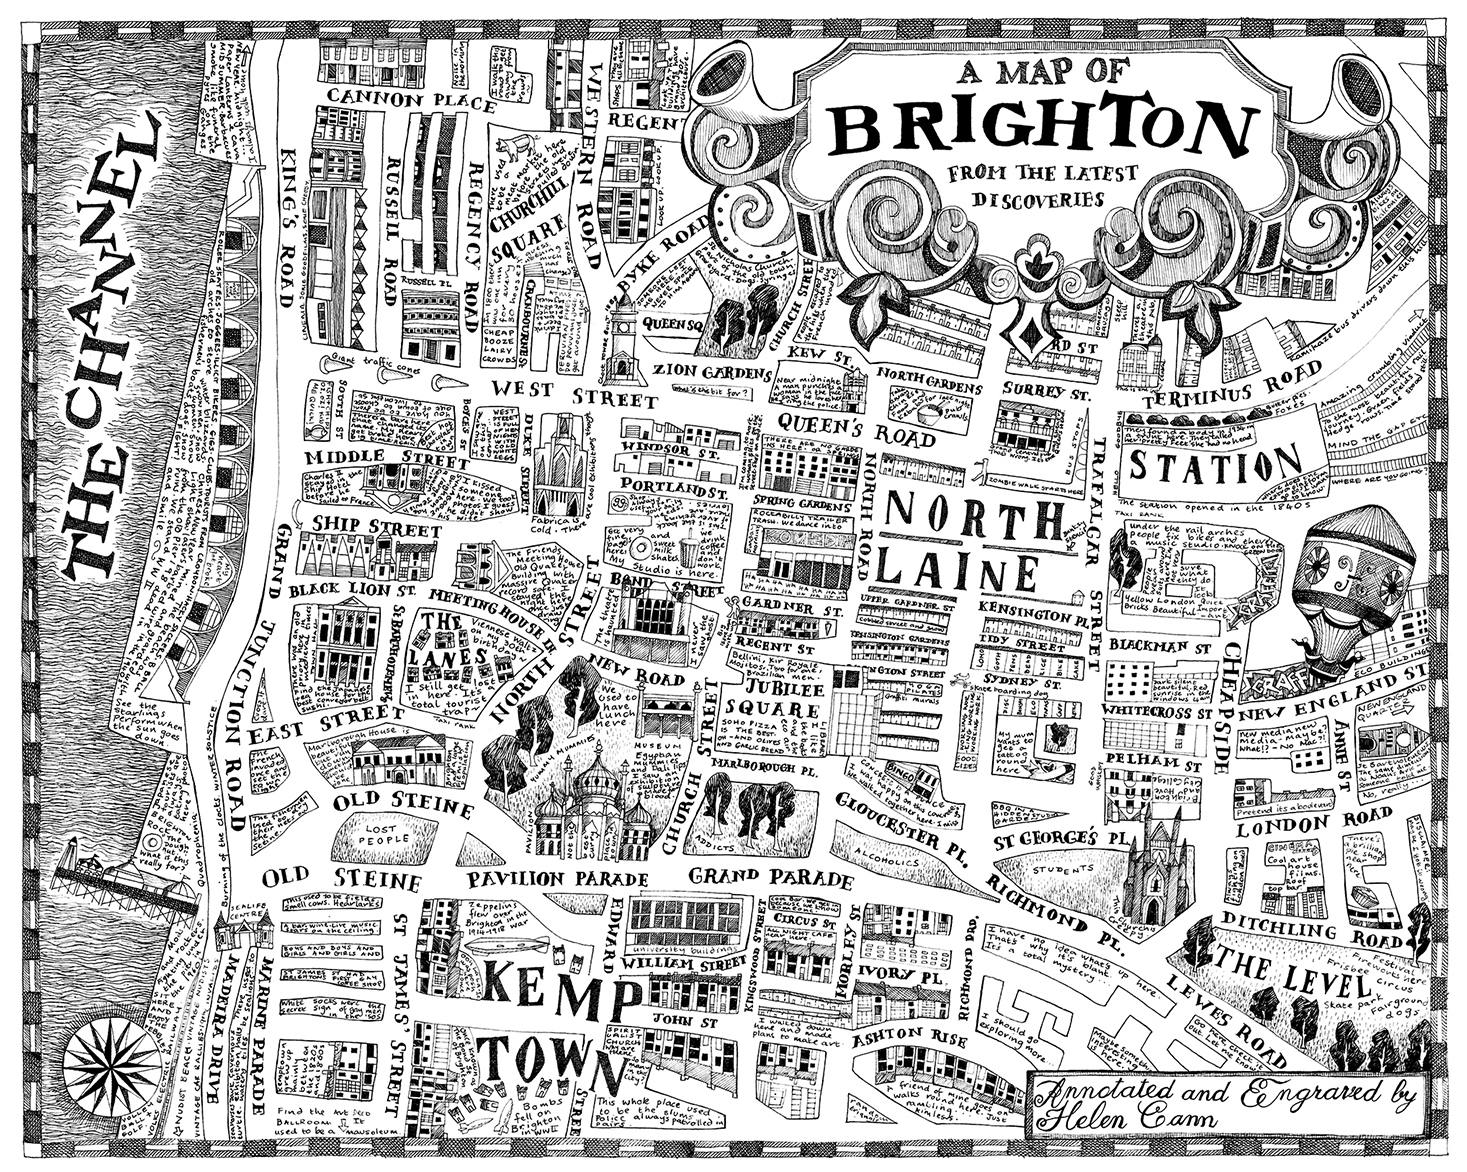 A map of Brighton from the Latest Discoveries 72 for blog posts.jpg